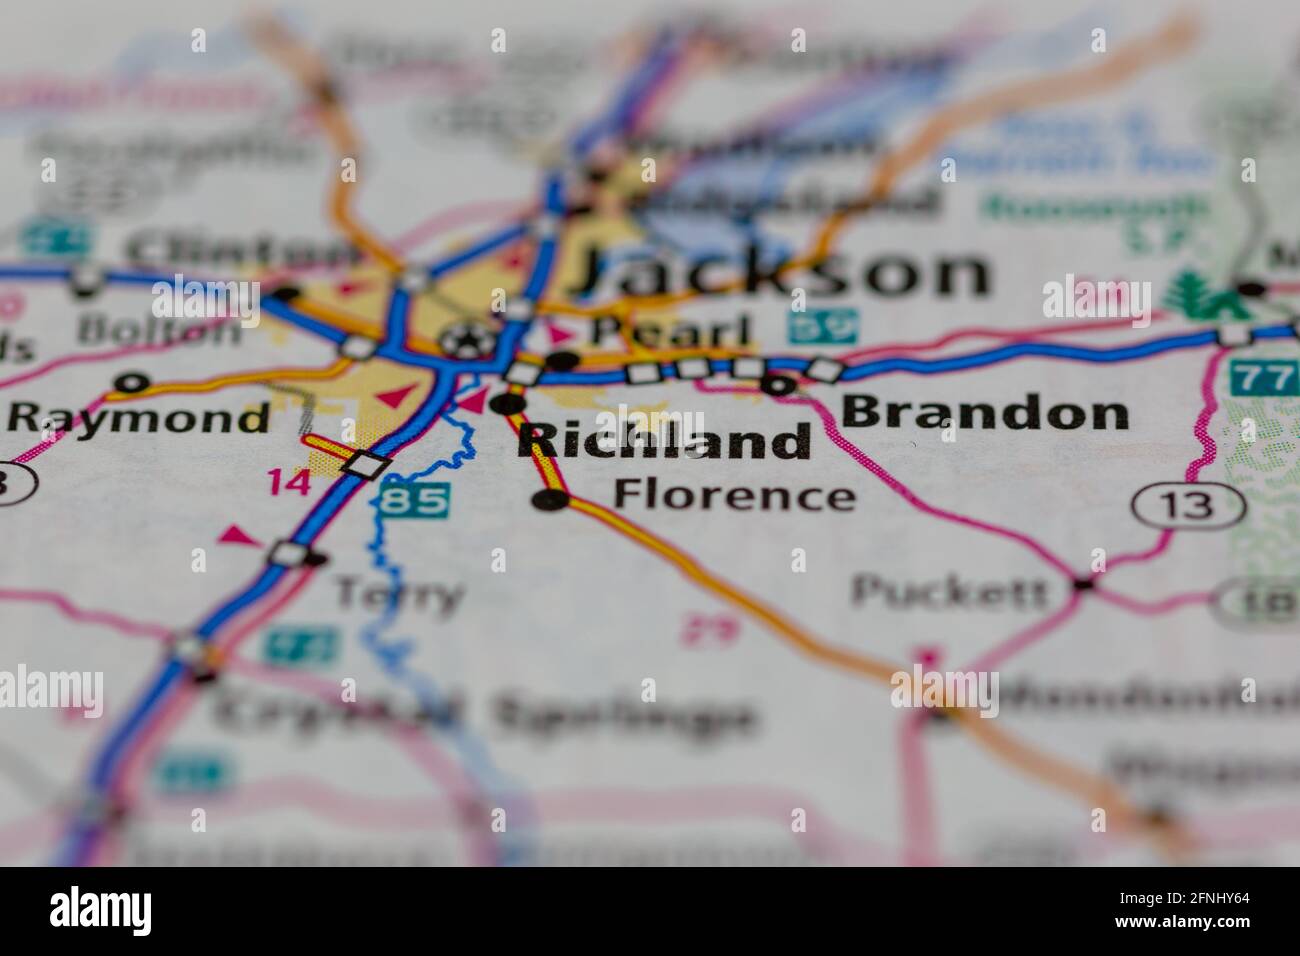 Richland Mississippi USA shown on a Geography map or road map Stock Photo